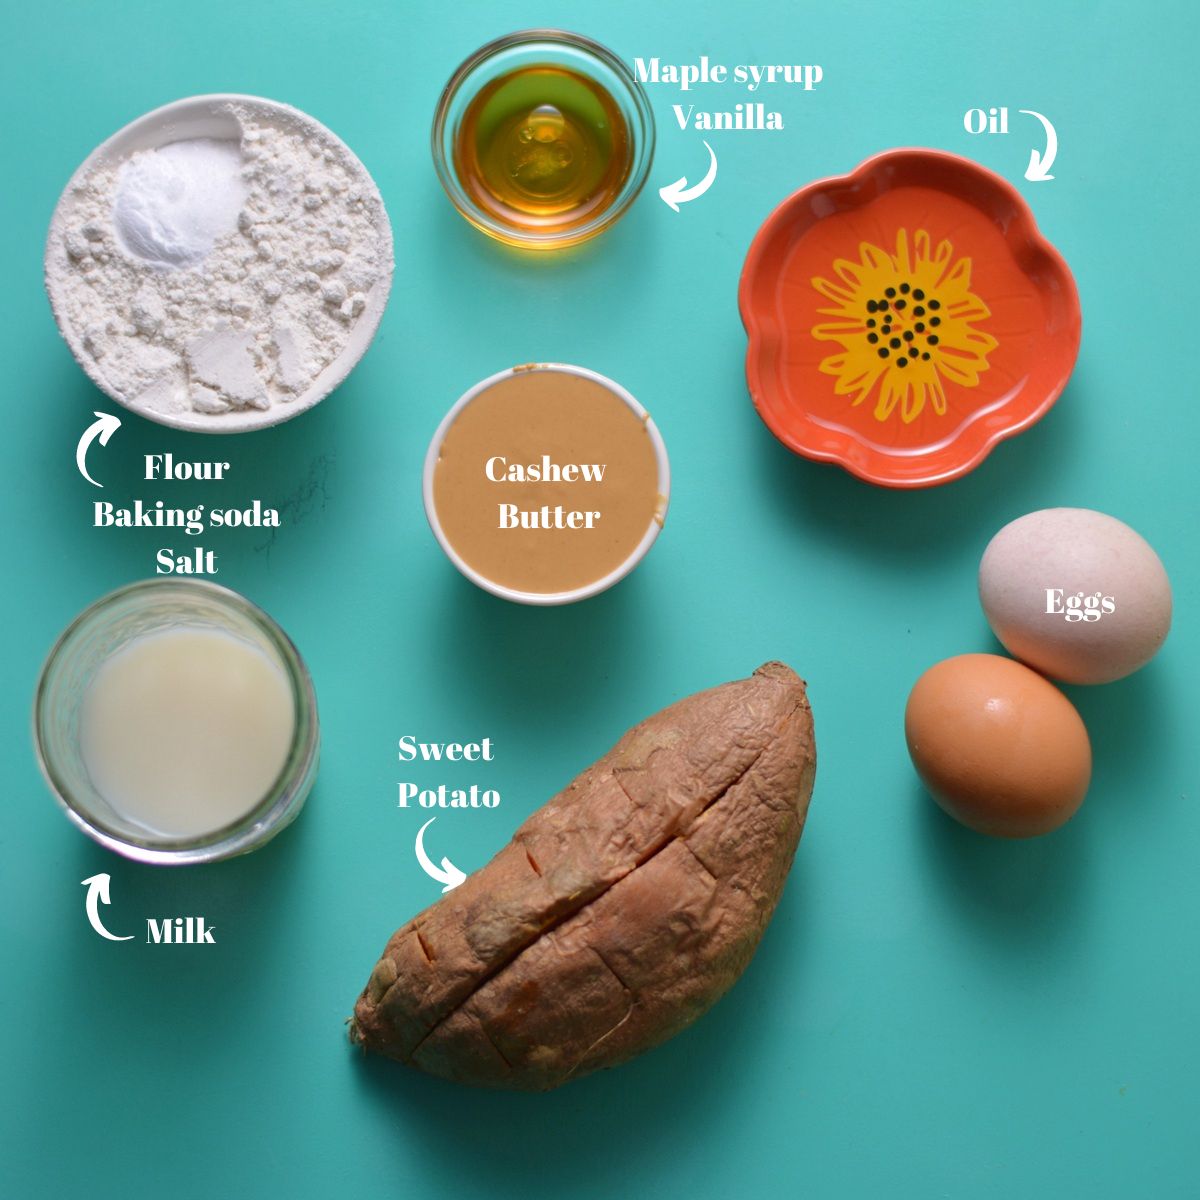 Ingredients for sweet potato waffles including sweet potato, cashew butter, milk, flour, baking soda, salt, oil, maple syrup, vanilla, and eggs.